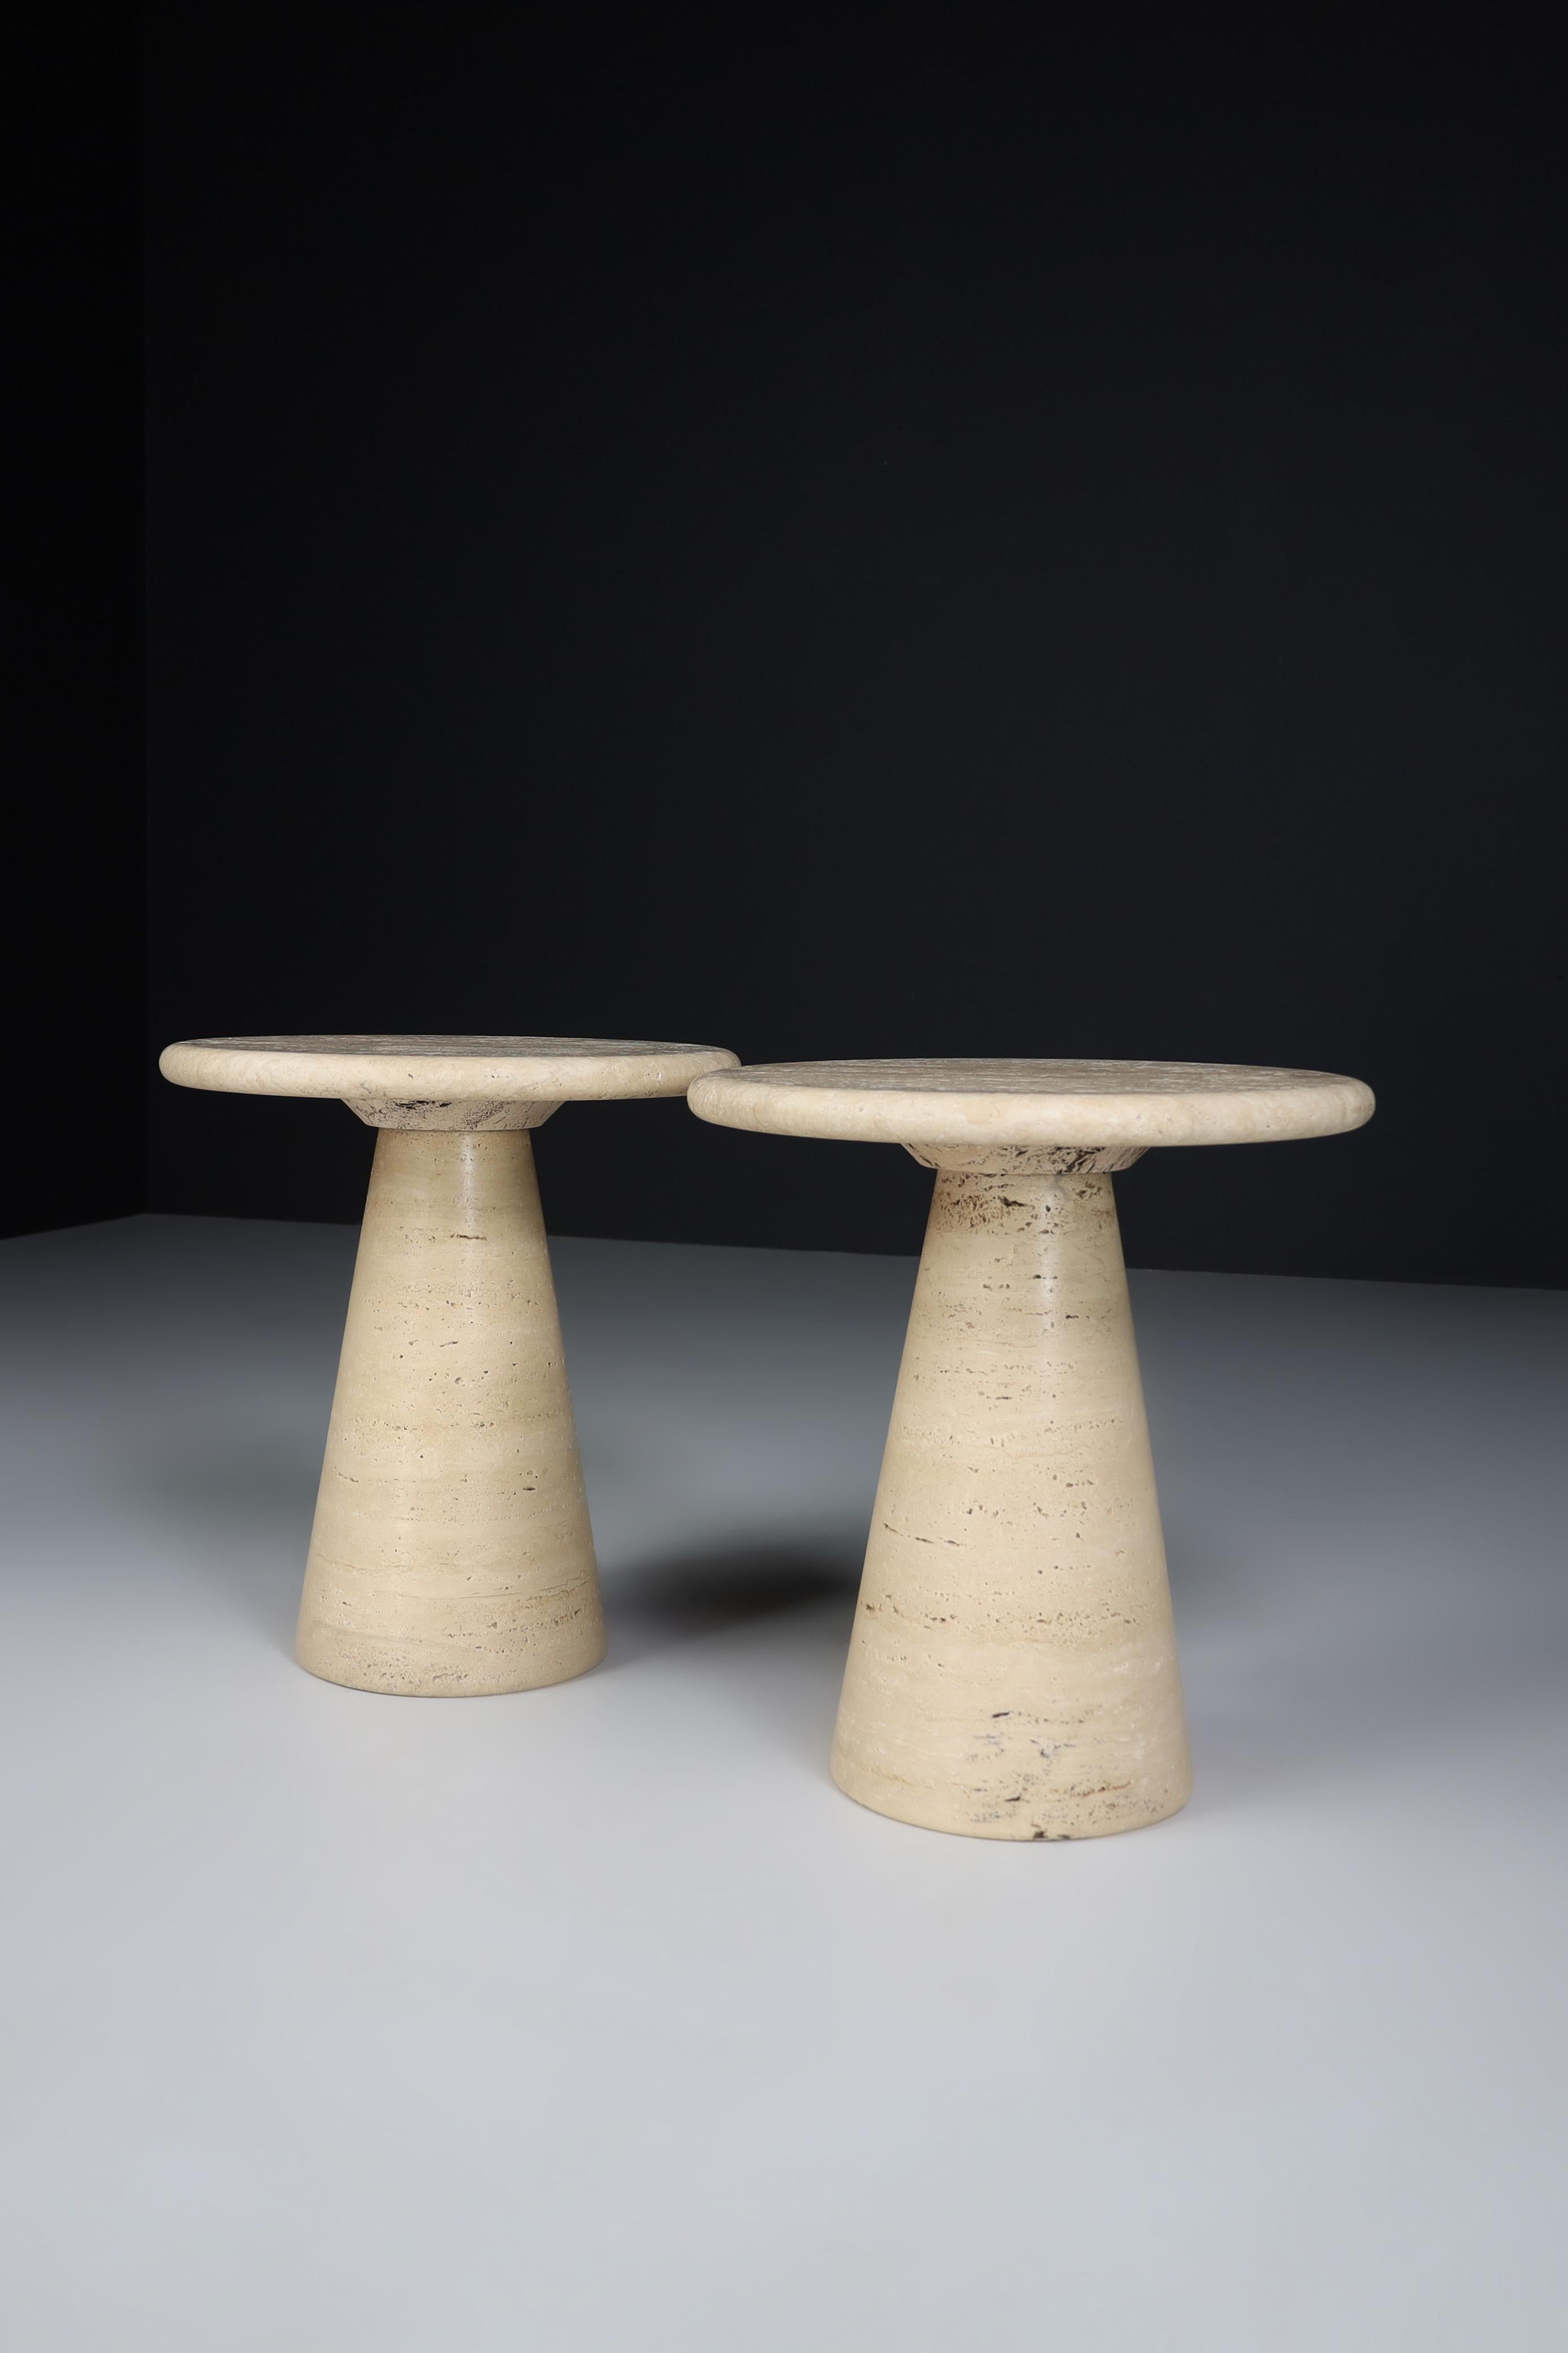 Modern Conical Travertine Side Tables, Italy, 1980s For Sale 4